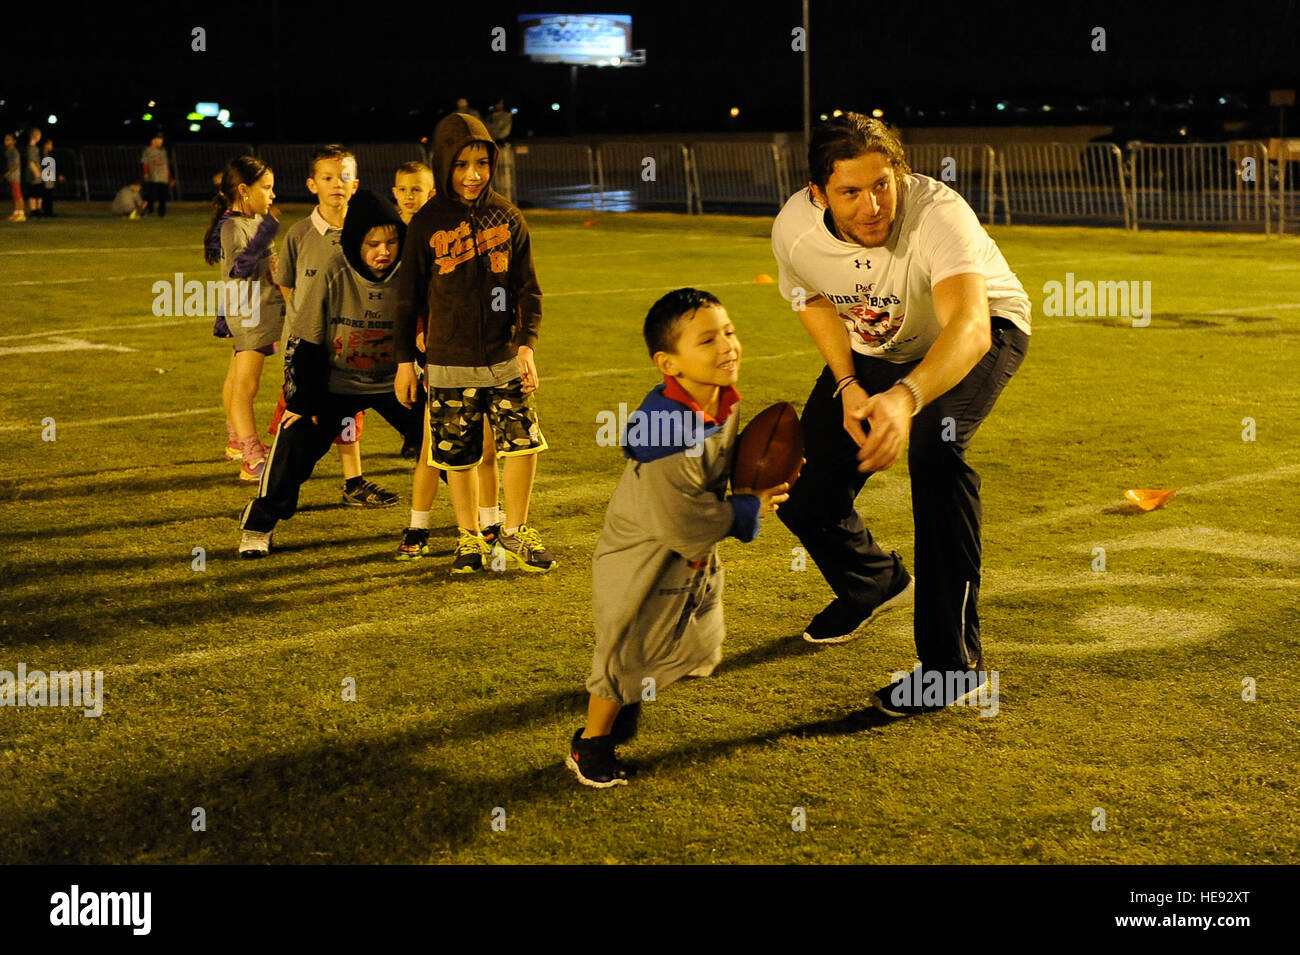 Gabriel Gutierrez, son of Staff Sgt. Arlene Gutierrez, 56th Security Force Squadron, accepts a hand off from New York Jets tight end, Zach Sudfeld during a youth football camp at Luke Air Force Base, Ariz., Jan. 29, 2015. The camp ran by ProCamps Worldwide, specialized in football fundamentals, with campers receiving instruction from NFL players and football coaches from the local area. Staff Sgt. Staci Miller) (Released) Stock Photo